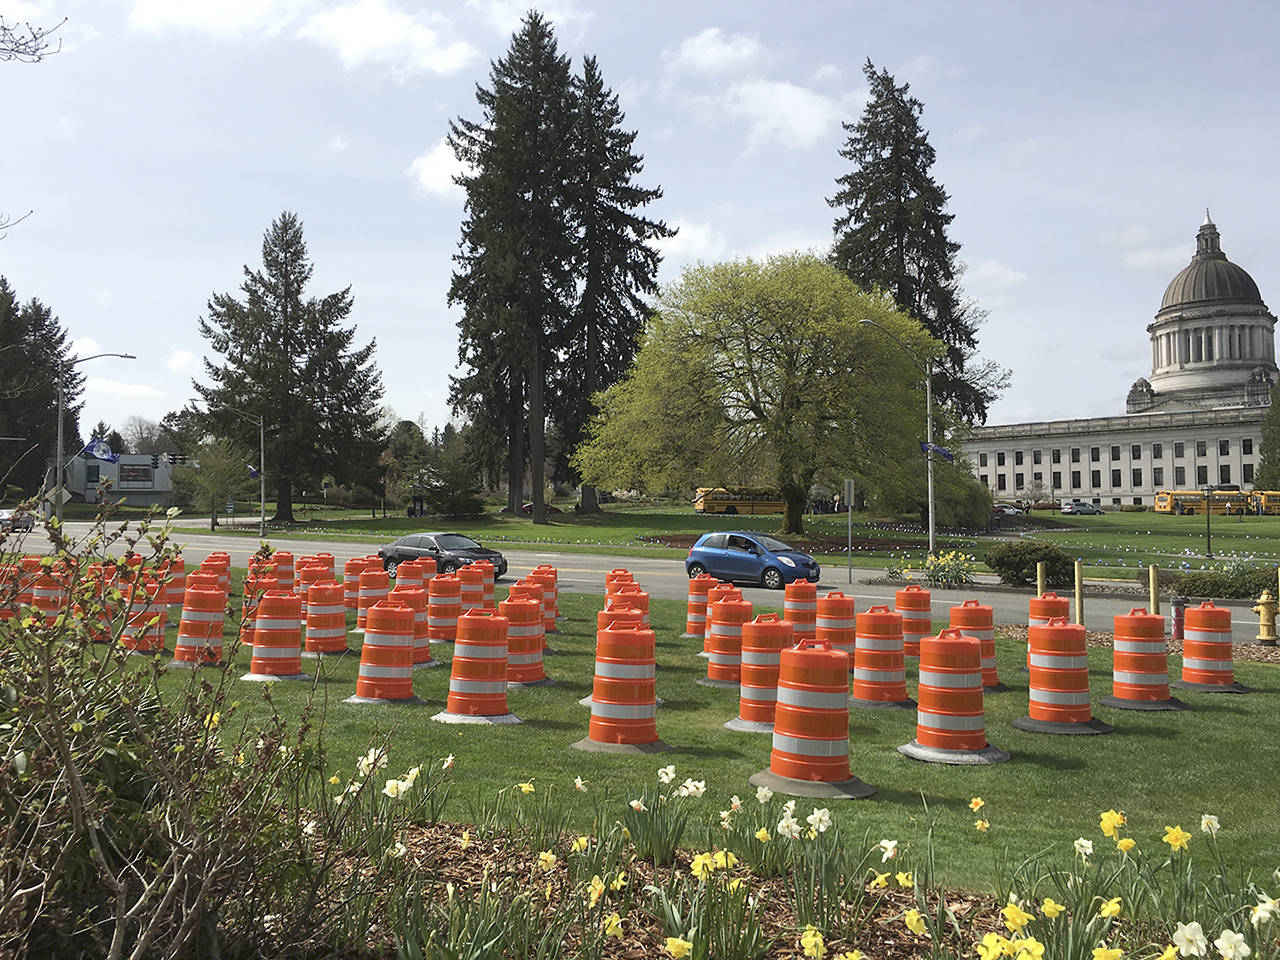 Orange work zone barrels fill a lawn near the capital in Olympia on April 9 to kick off National Work Zone Awareness Week. In all, 60 barrels were placed on the lawn, representing the 60 WSDOT workers killed on the job since 1950. (WSDOT photo)